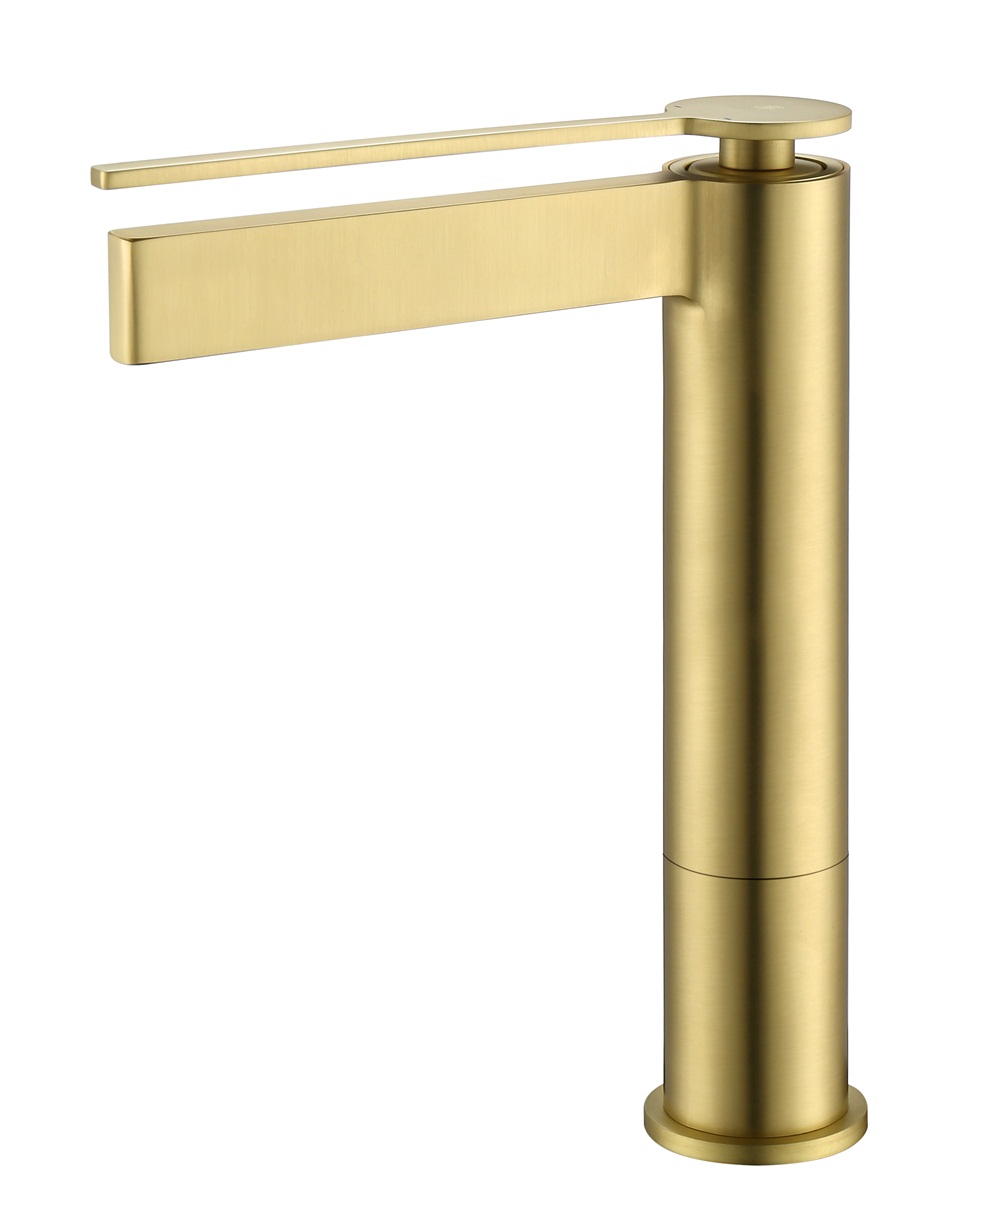 Brushed Gold Faucet Easy Installation Deck Mount Hot Cold Water Basin Faucets Mixer Sink Tap Bathroom